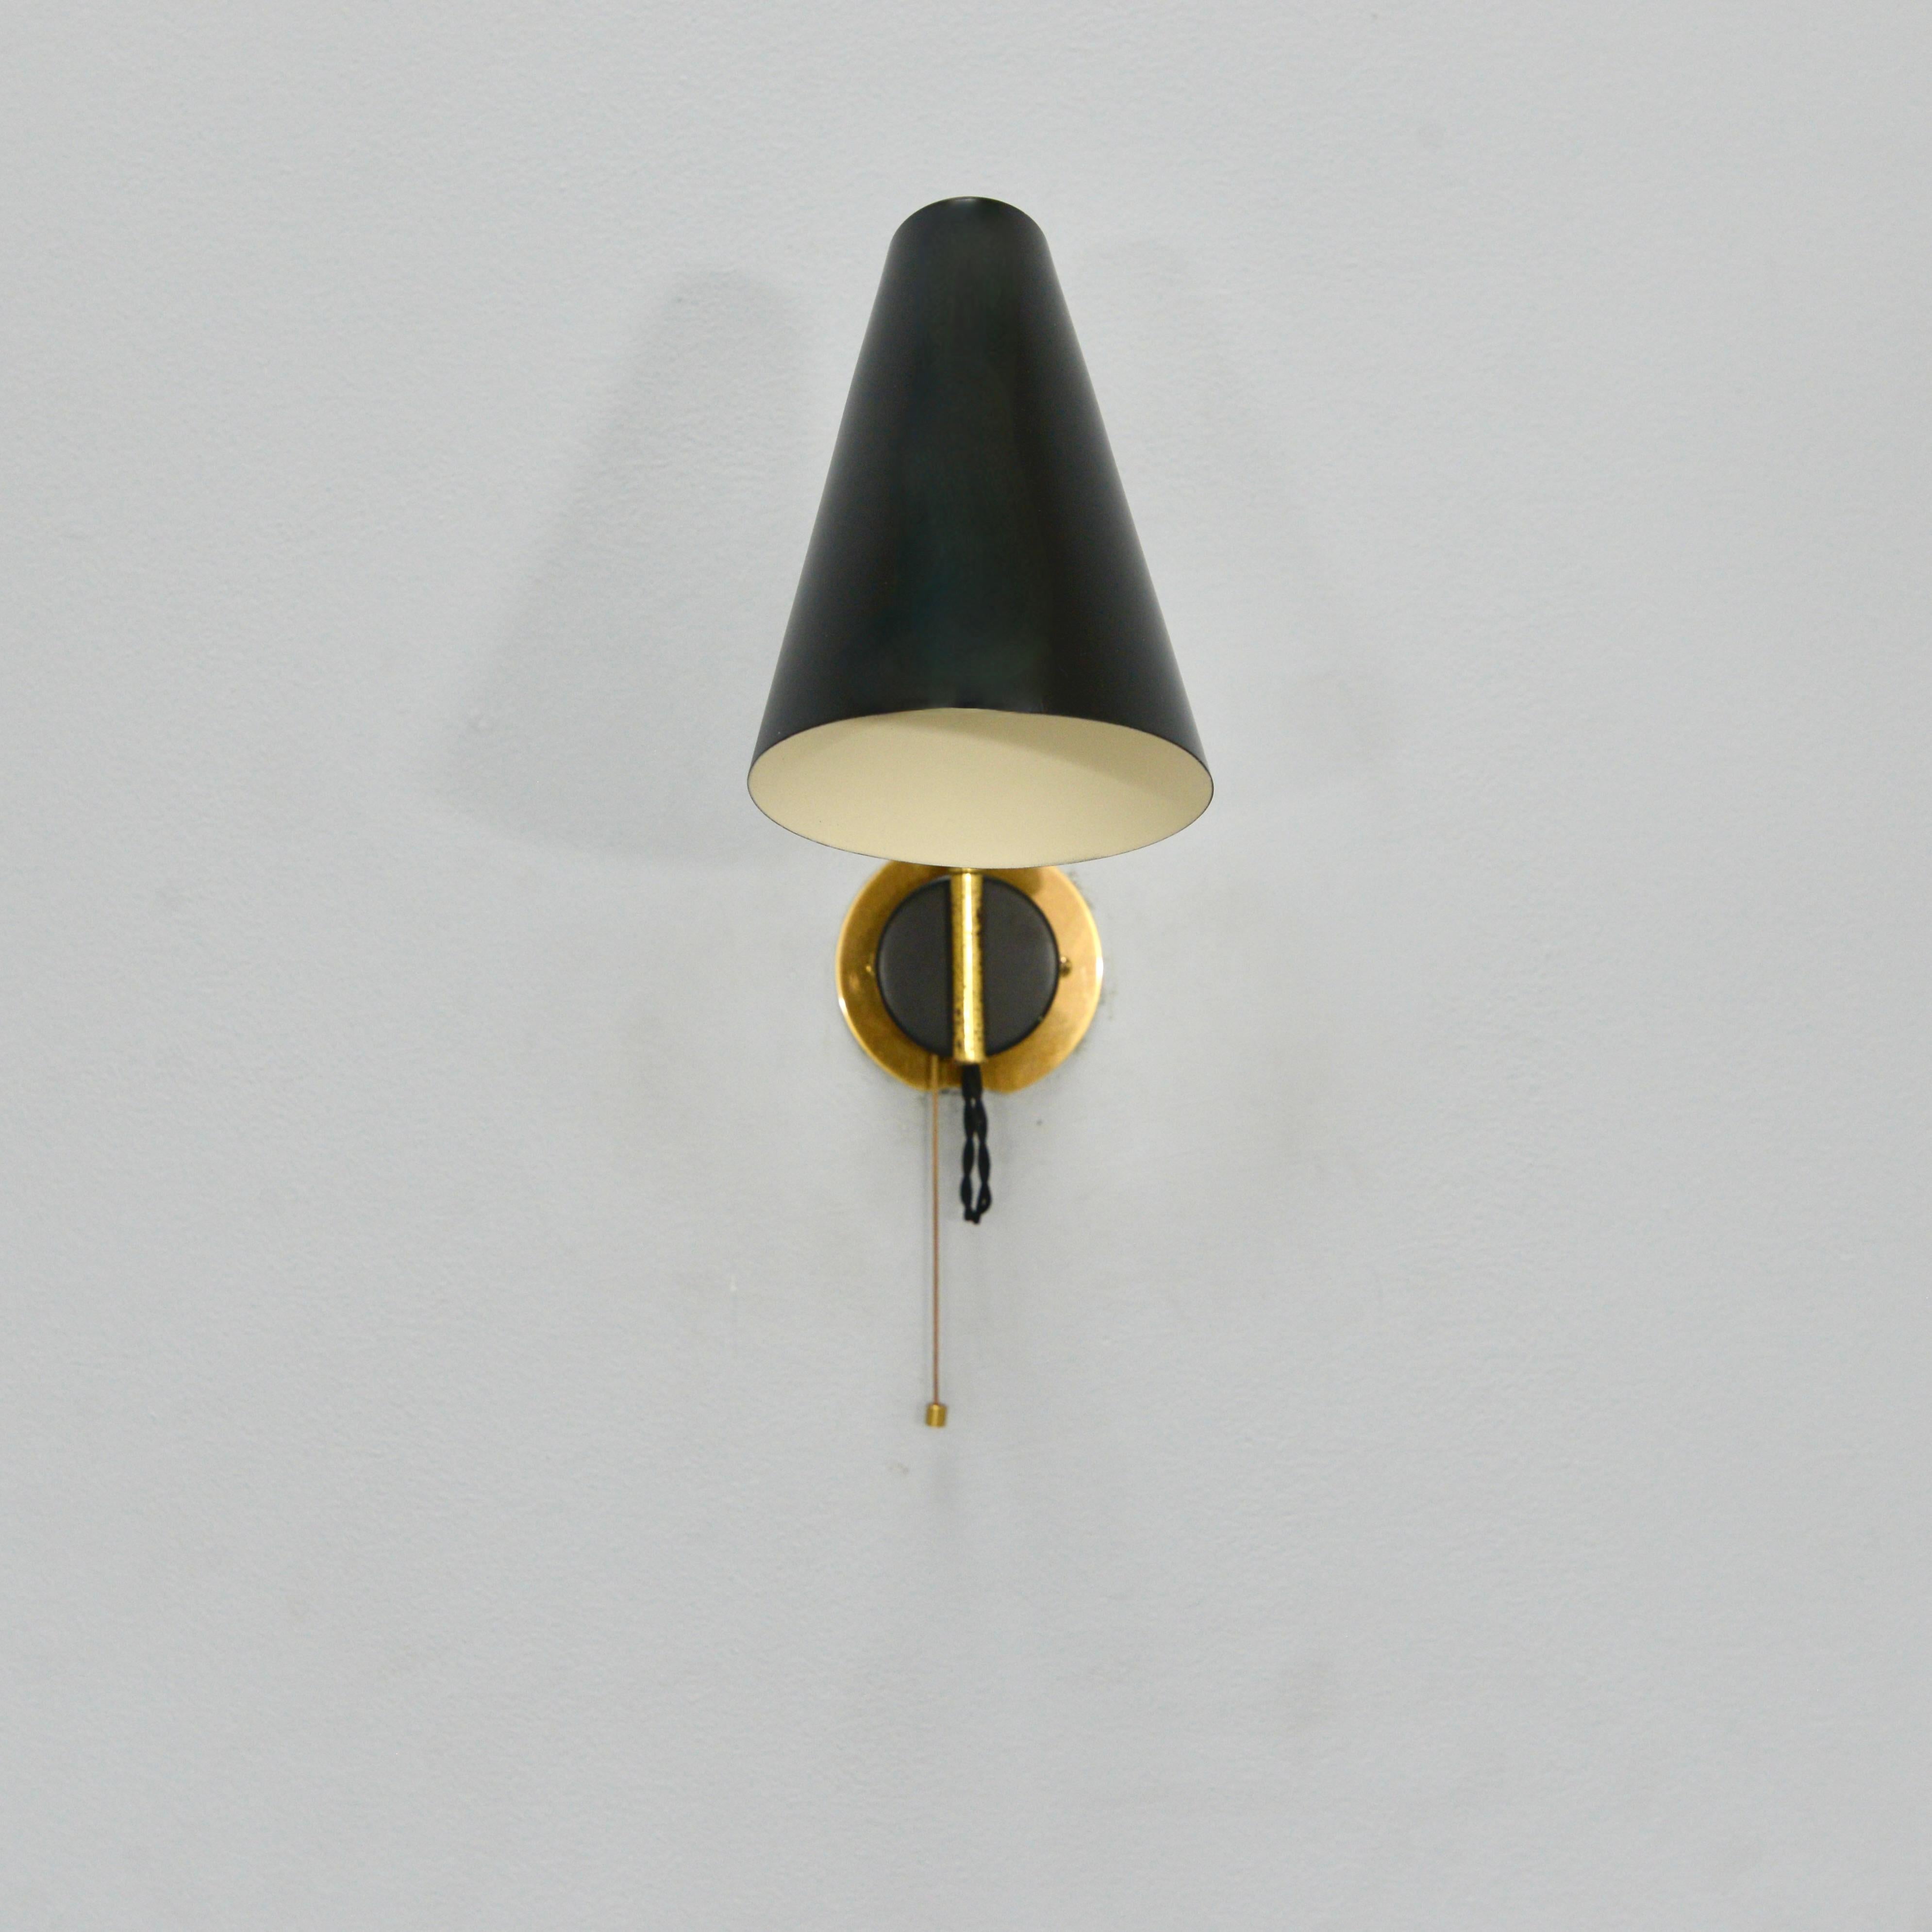 Mid-20th Century Italian Adjustable Sconce with Pull String Switch